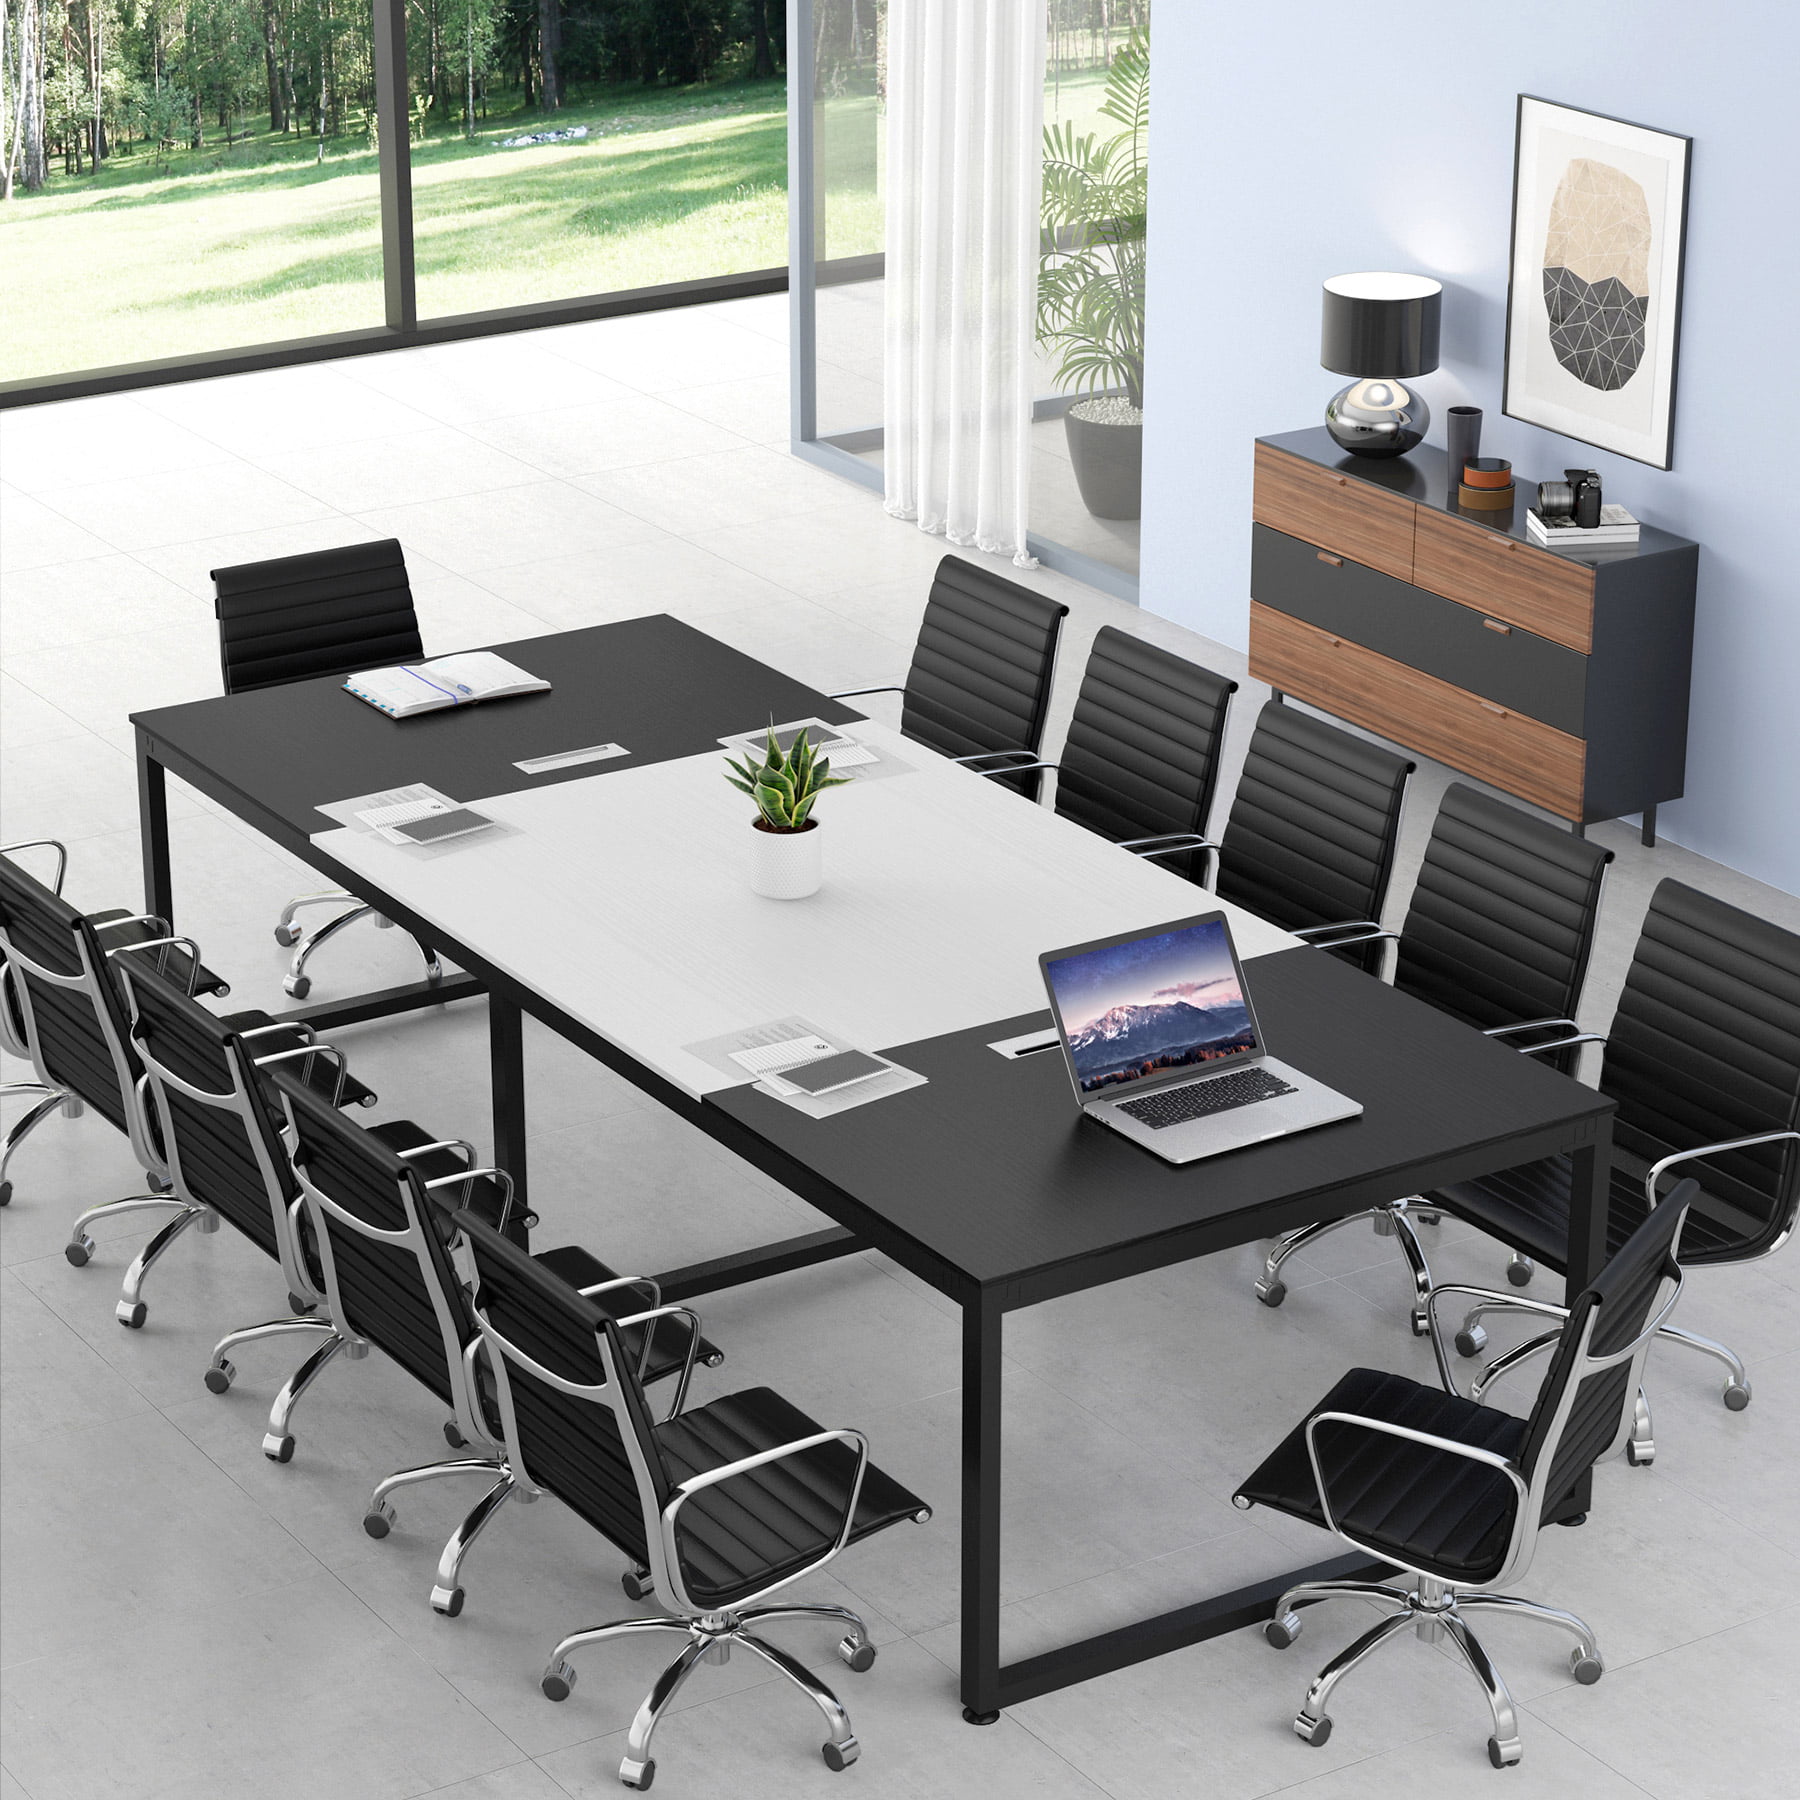 office meeting table boardroom conference 